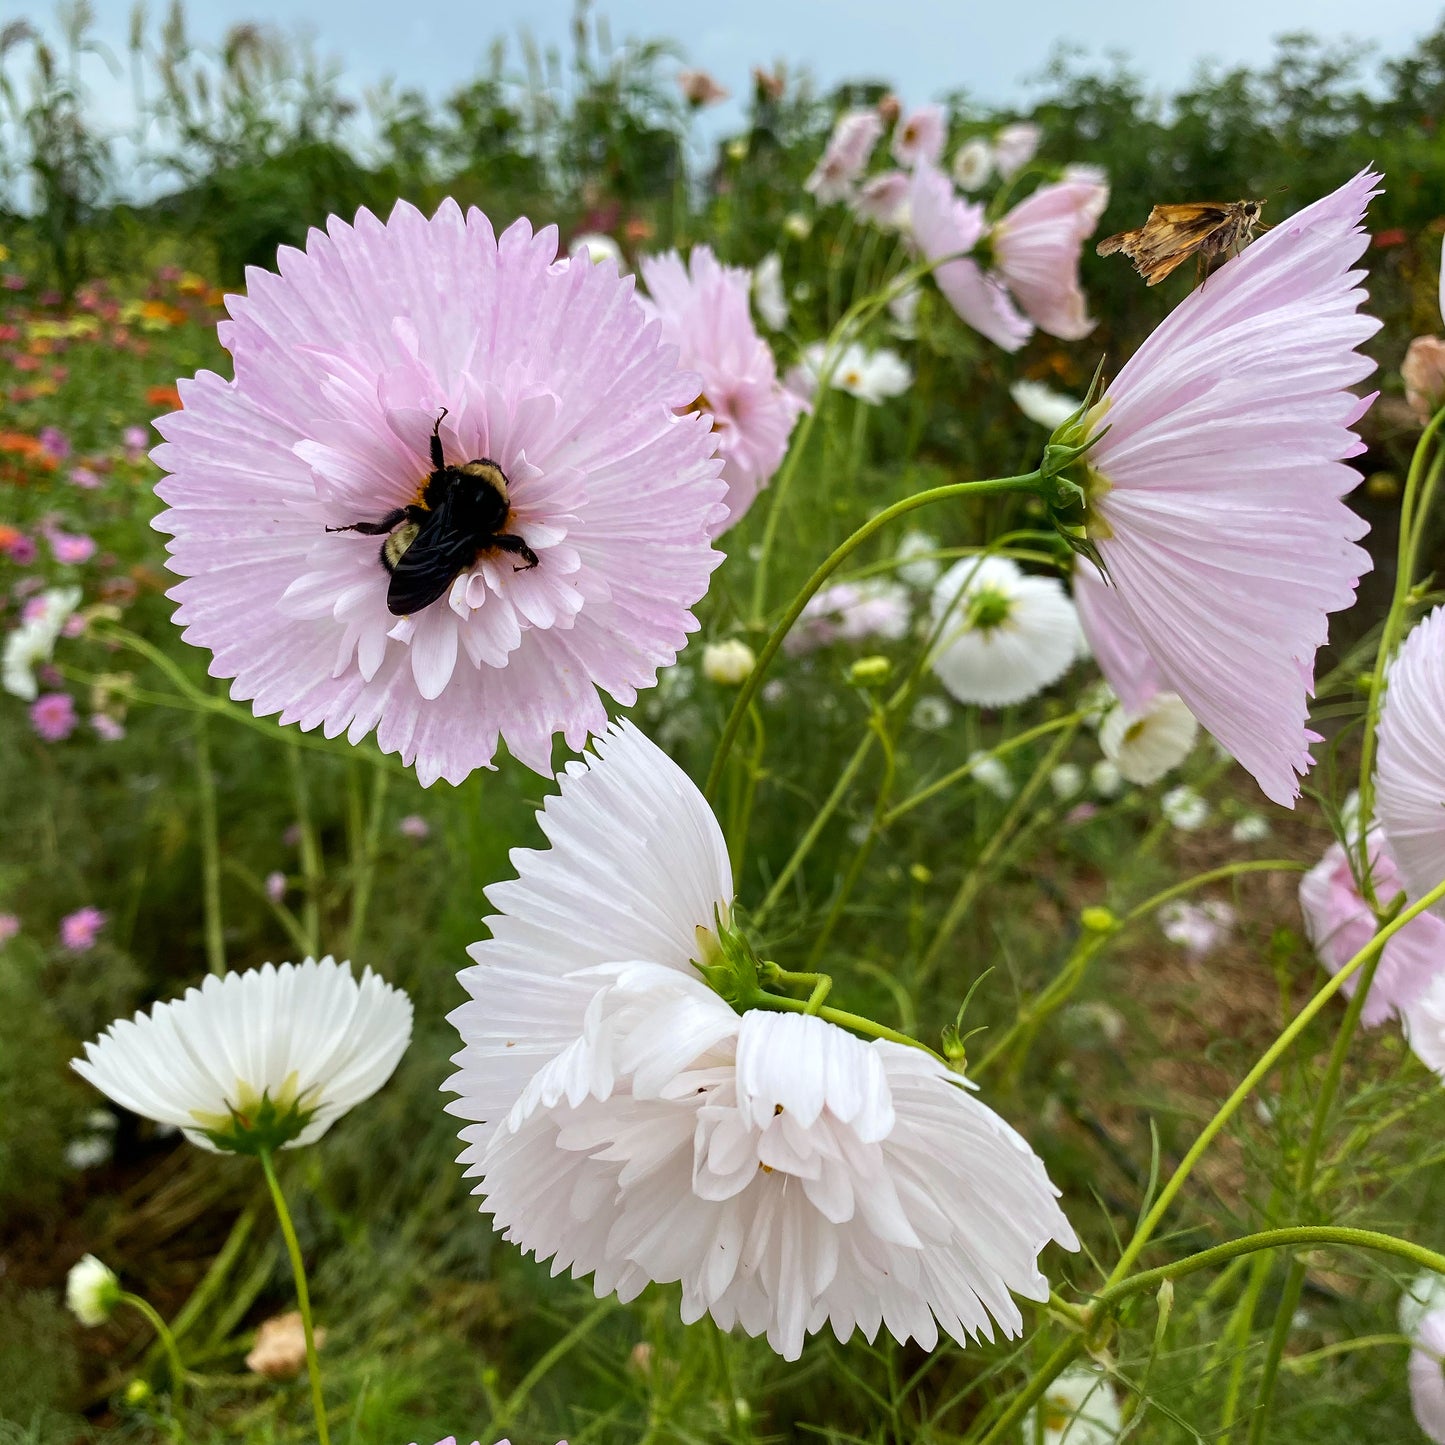 cosmos is great for pollinator gardens